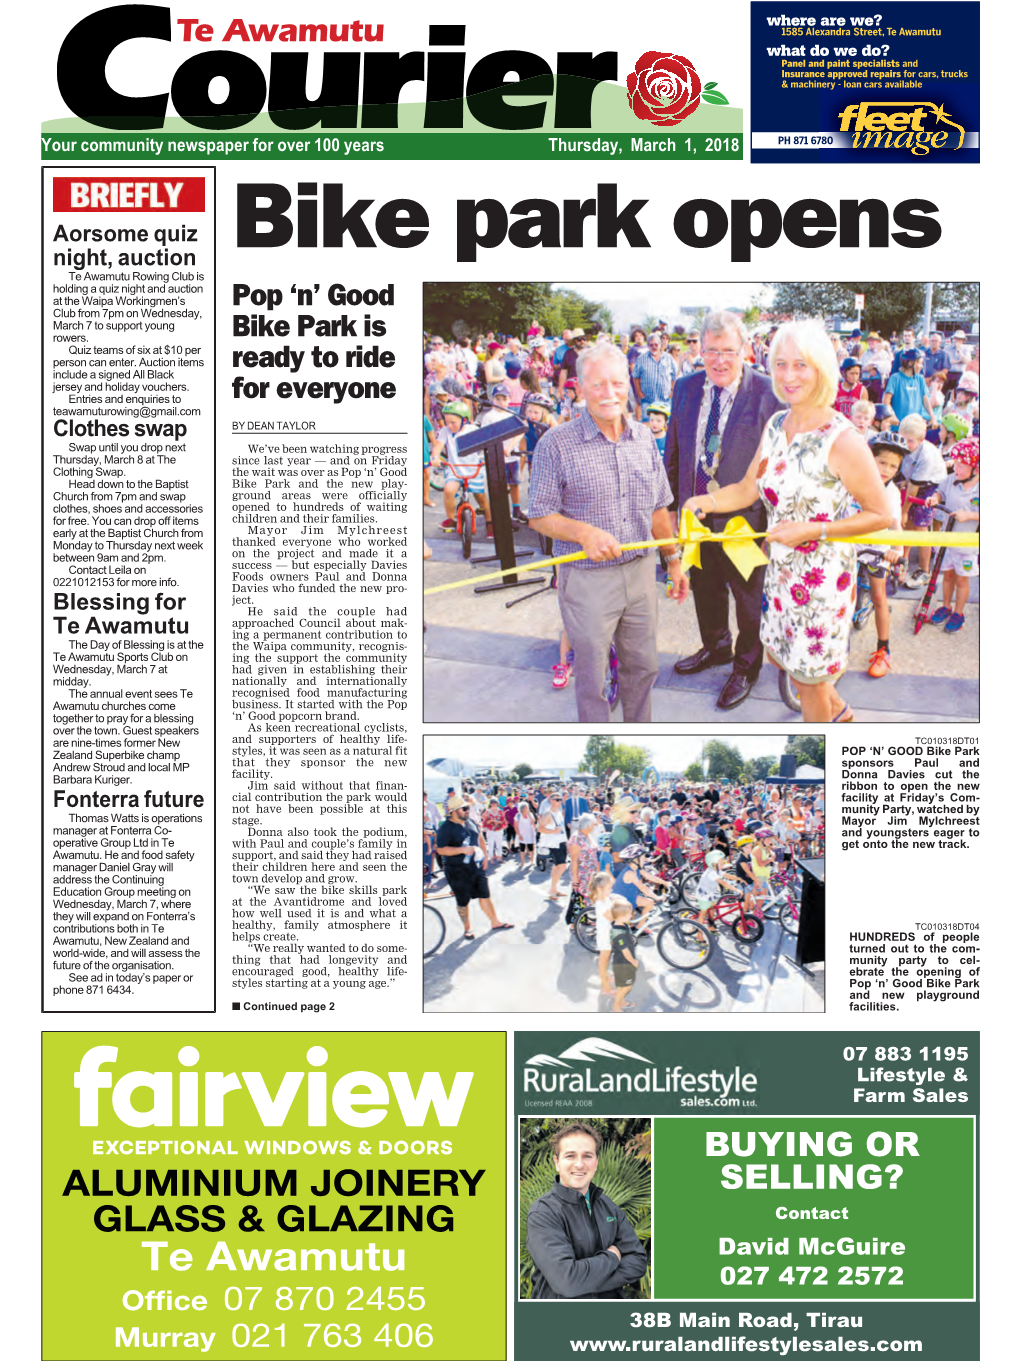 Te Awamutu Courier Thursday, March 1, 2018 New Parks a Hit with Kids